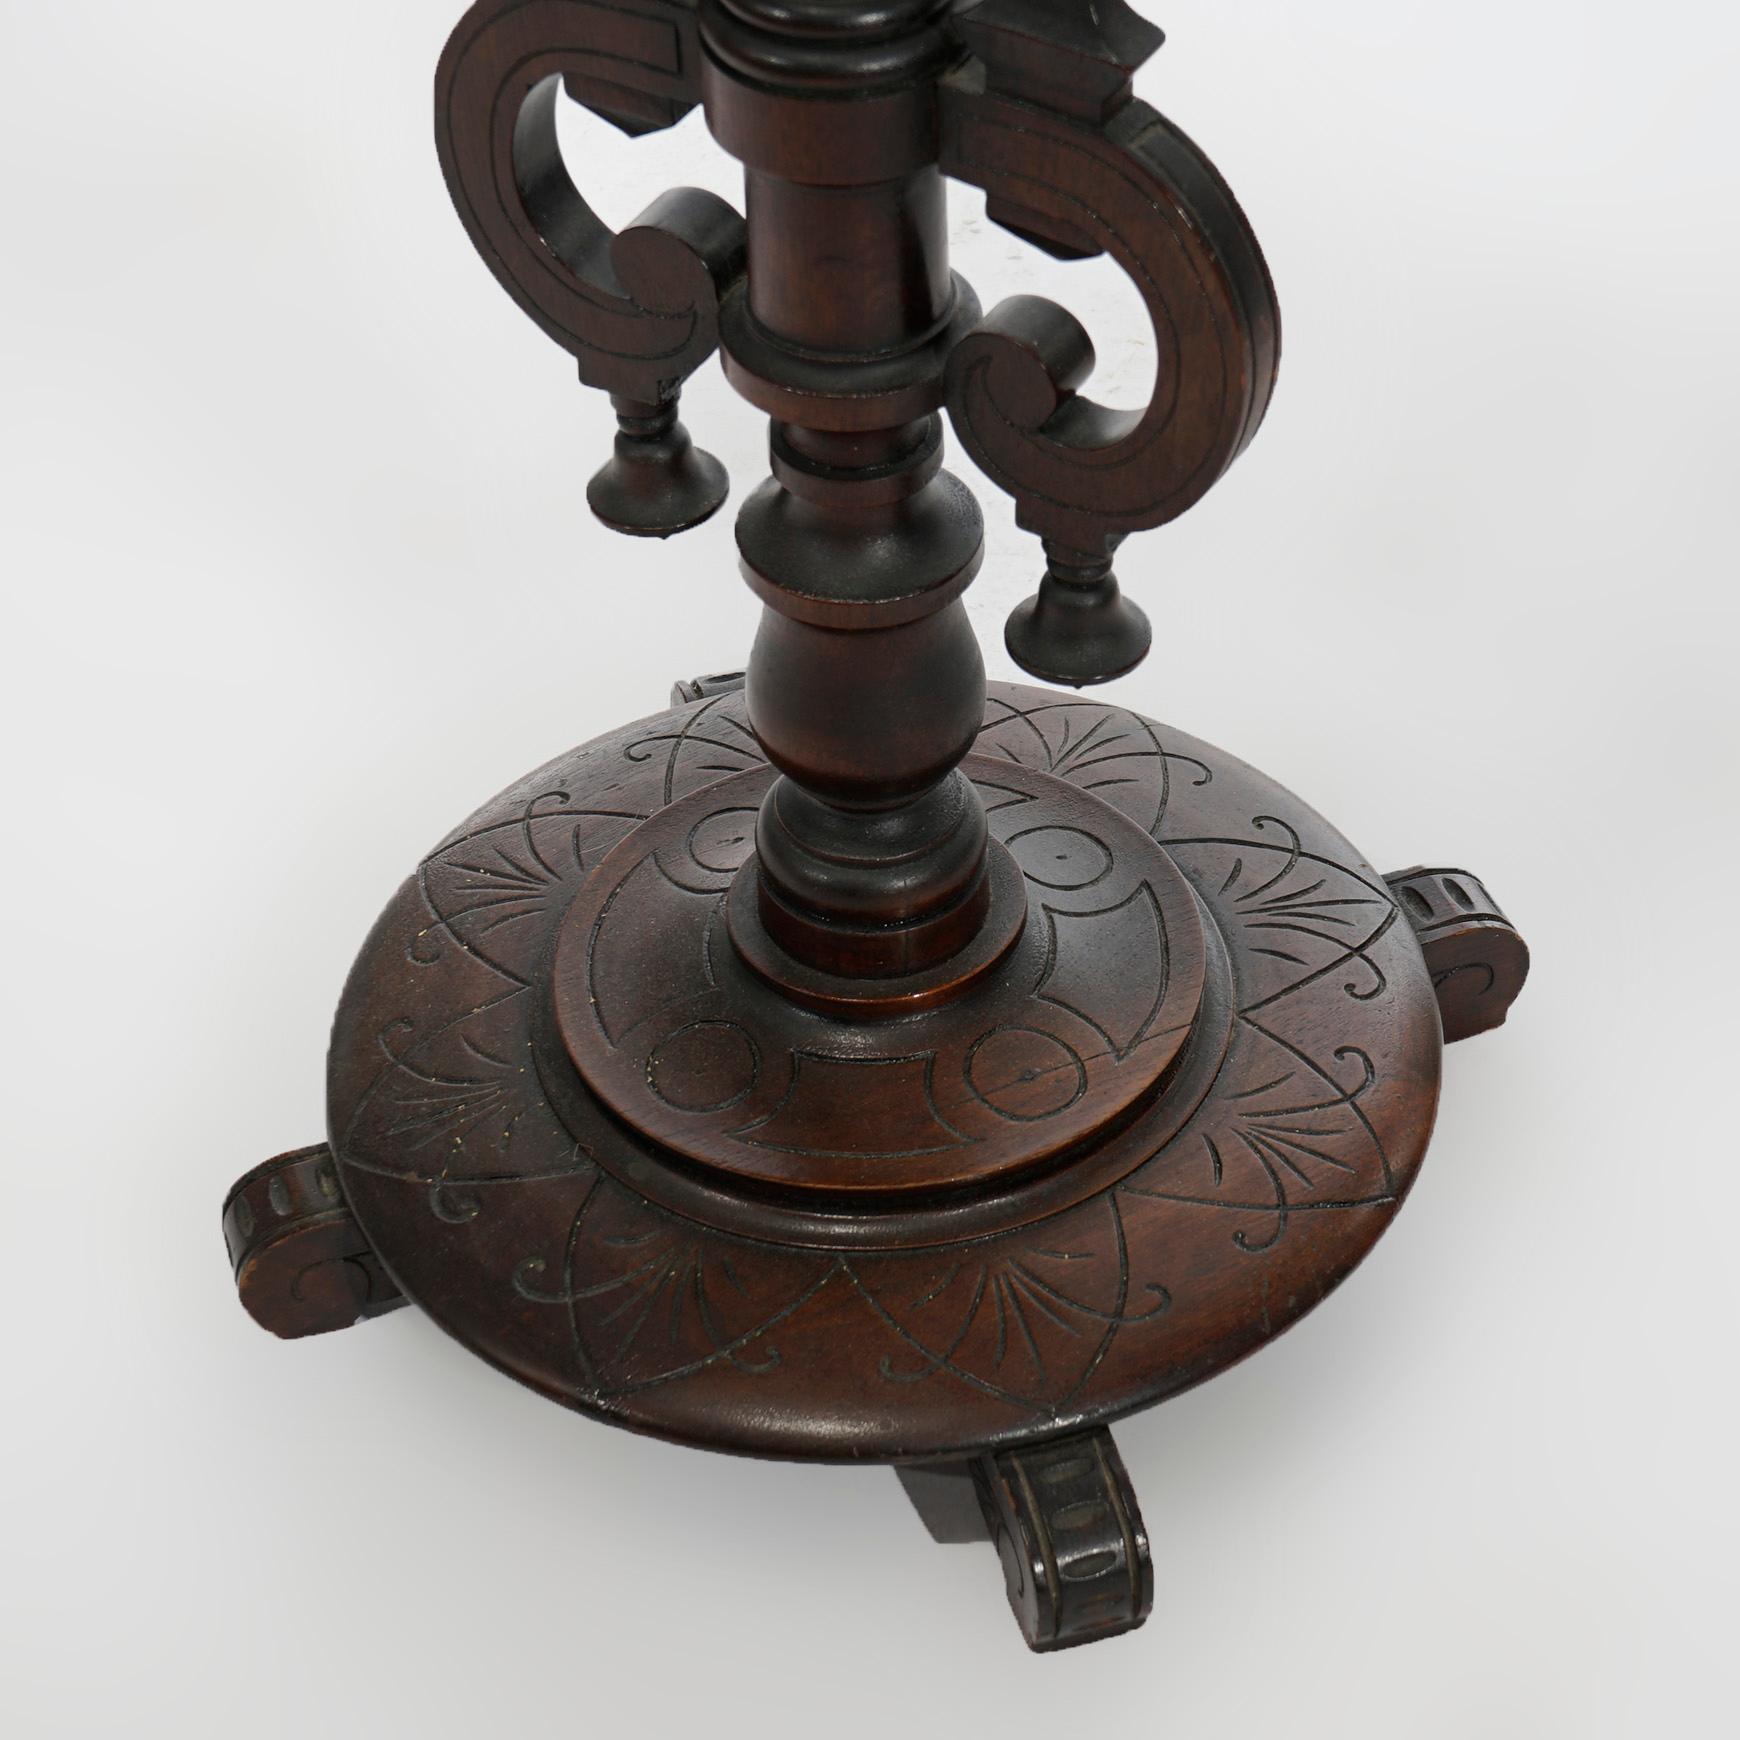 Antique Aesthetic Movement Carved Walnut Sculpture Display Pedestal Circa 1890 For Sale 10